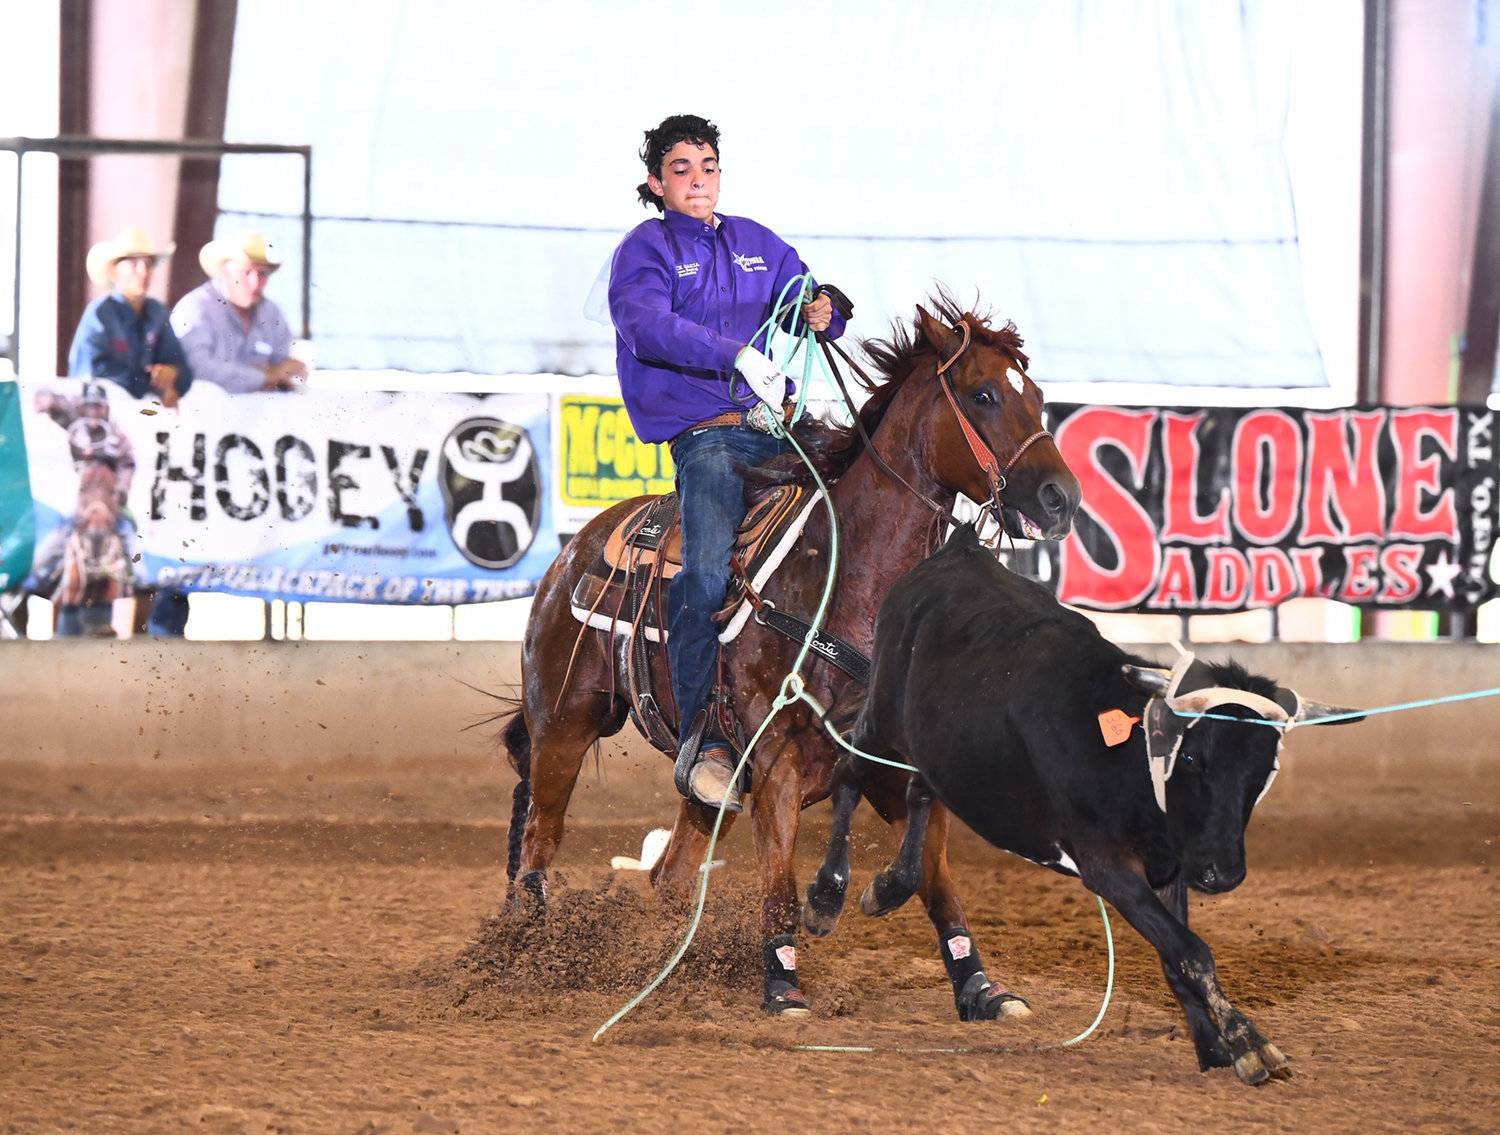 Buck Garza of Gonzales competes during a past Texas Junior High Rodeo Association state finals in team roping. The event returns this weekend to Gonzales, which has been the lone host city for this event since it began.